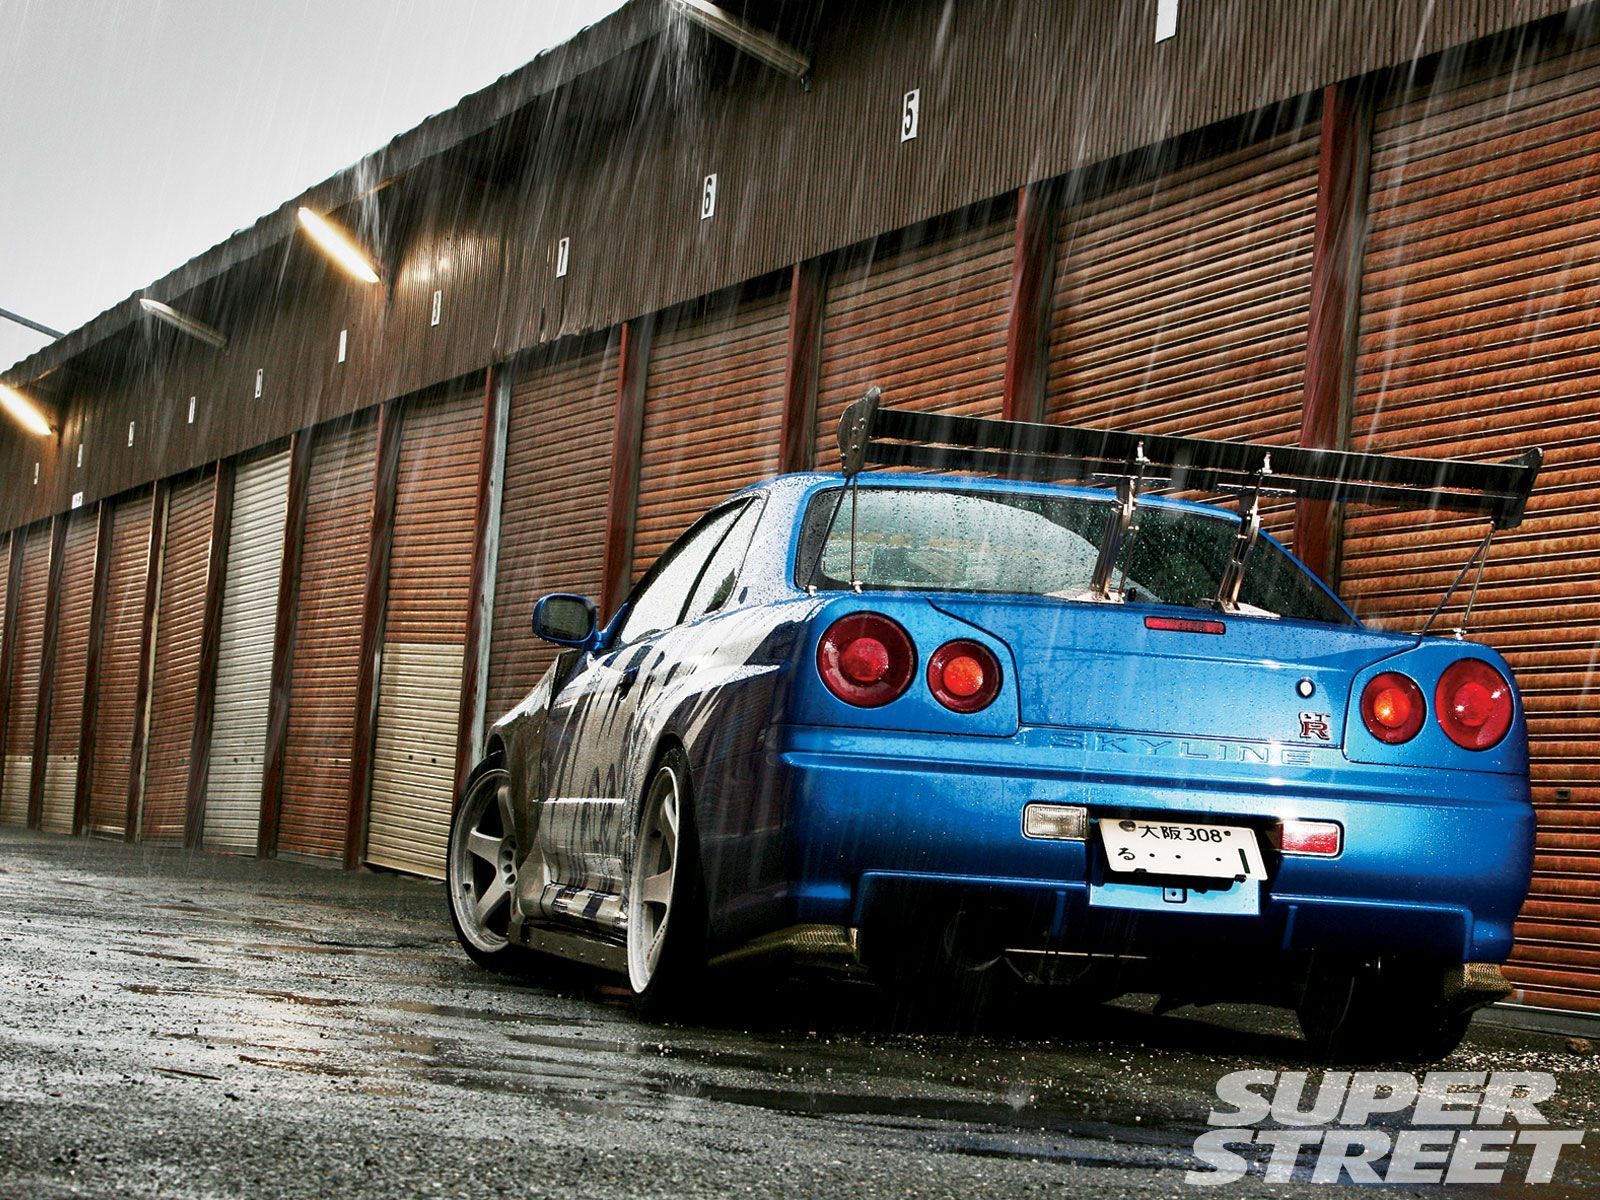 R34 wallpapers